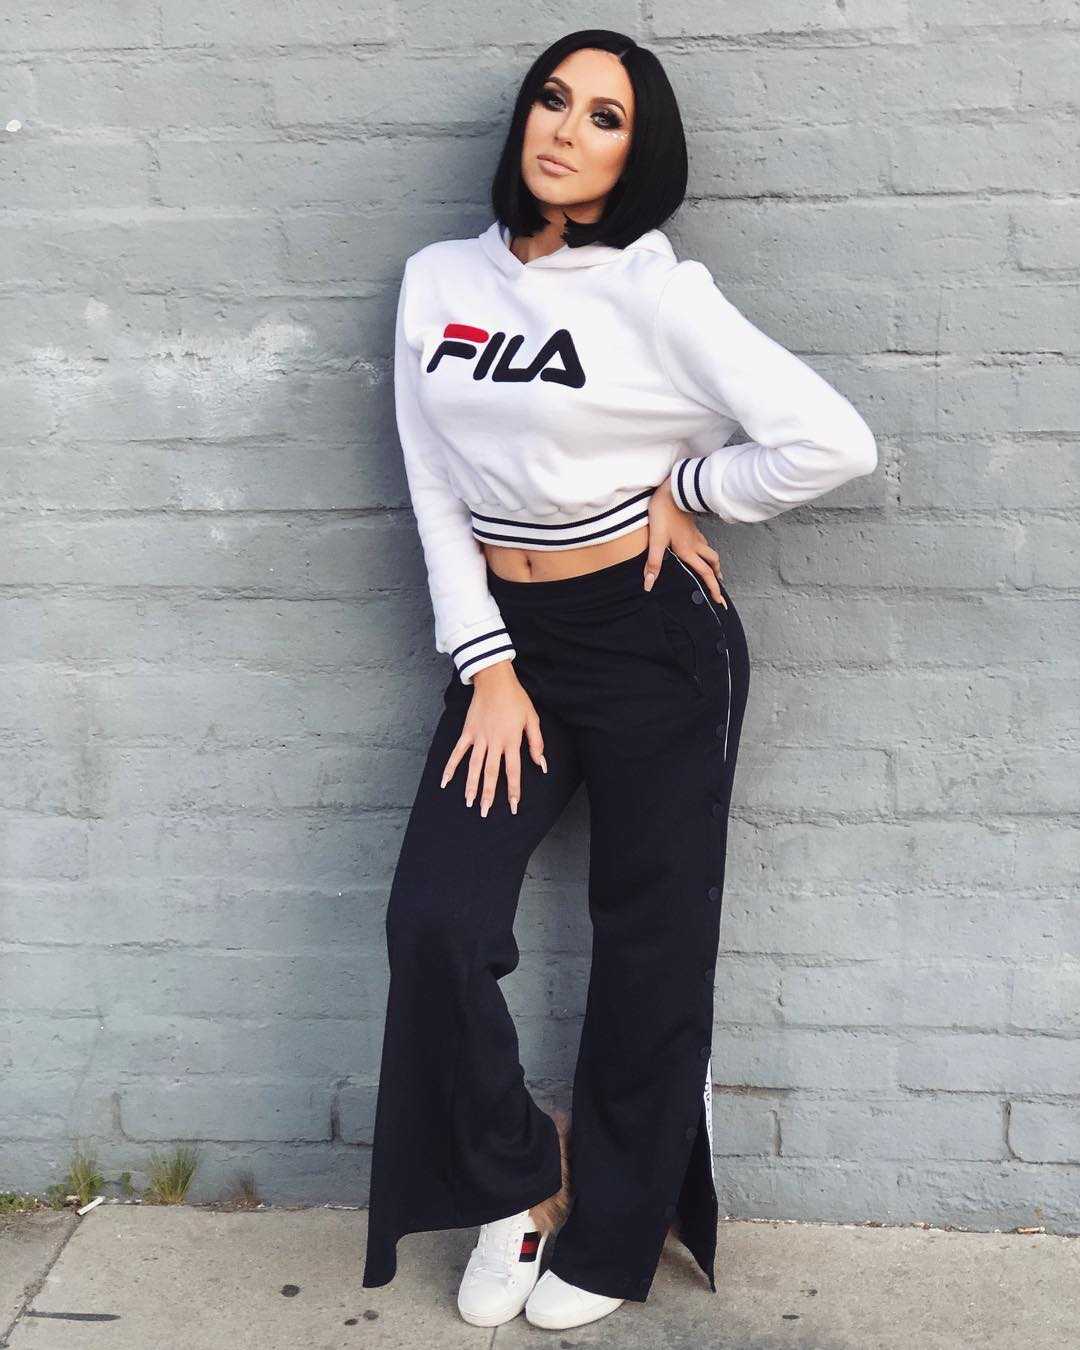 51 Hottest Jaclyn Hill Big Butt Pictures That Are Basically Flawless 19